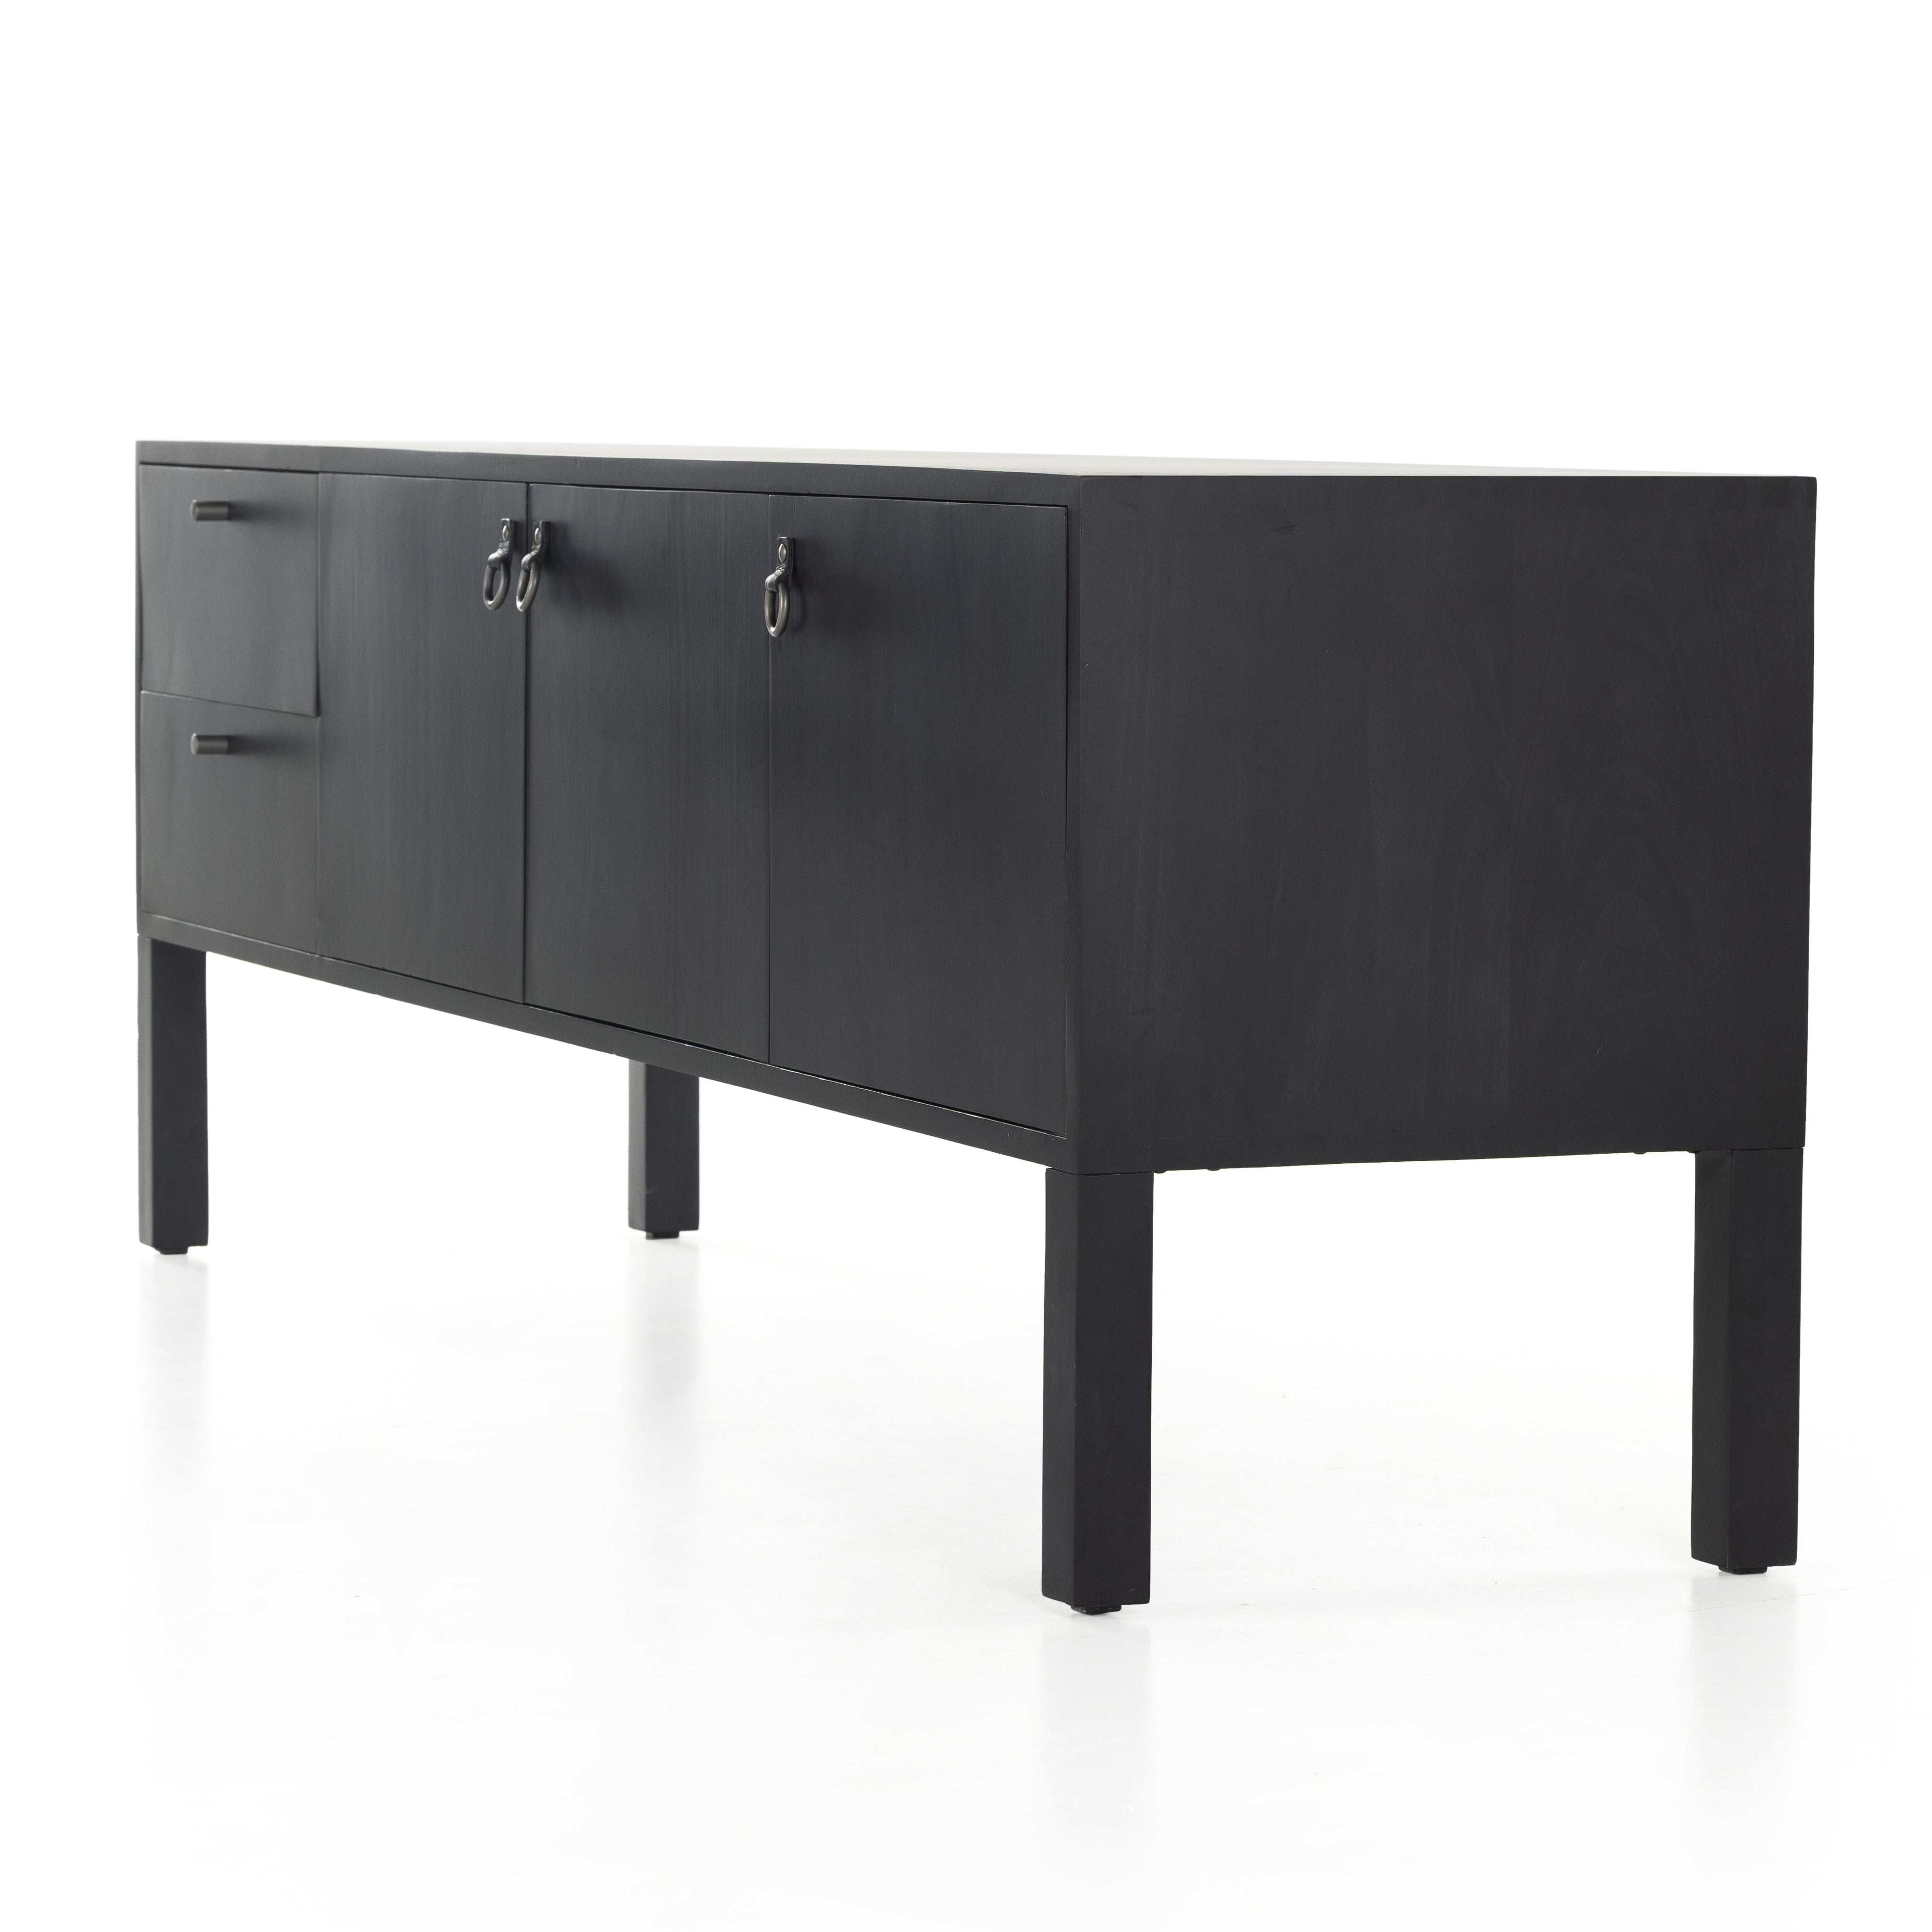 Beautifully simple in spirit. Black-washed dry poplar forms a clean-lined media console with faux dovetail joinery plus iron and leather hardware, for a material-driven update to Shaker-inspired styling. Rear cutouts for cord management. Amethyst Home provides interior design, new construction, custom furniture, and area rugs in the Dallas metro area.